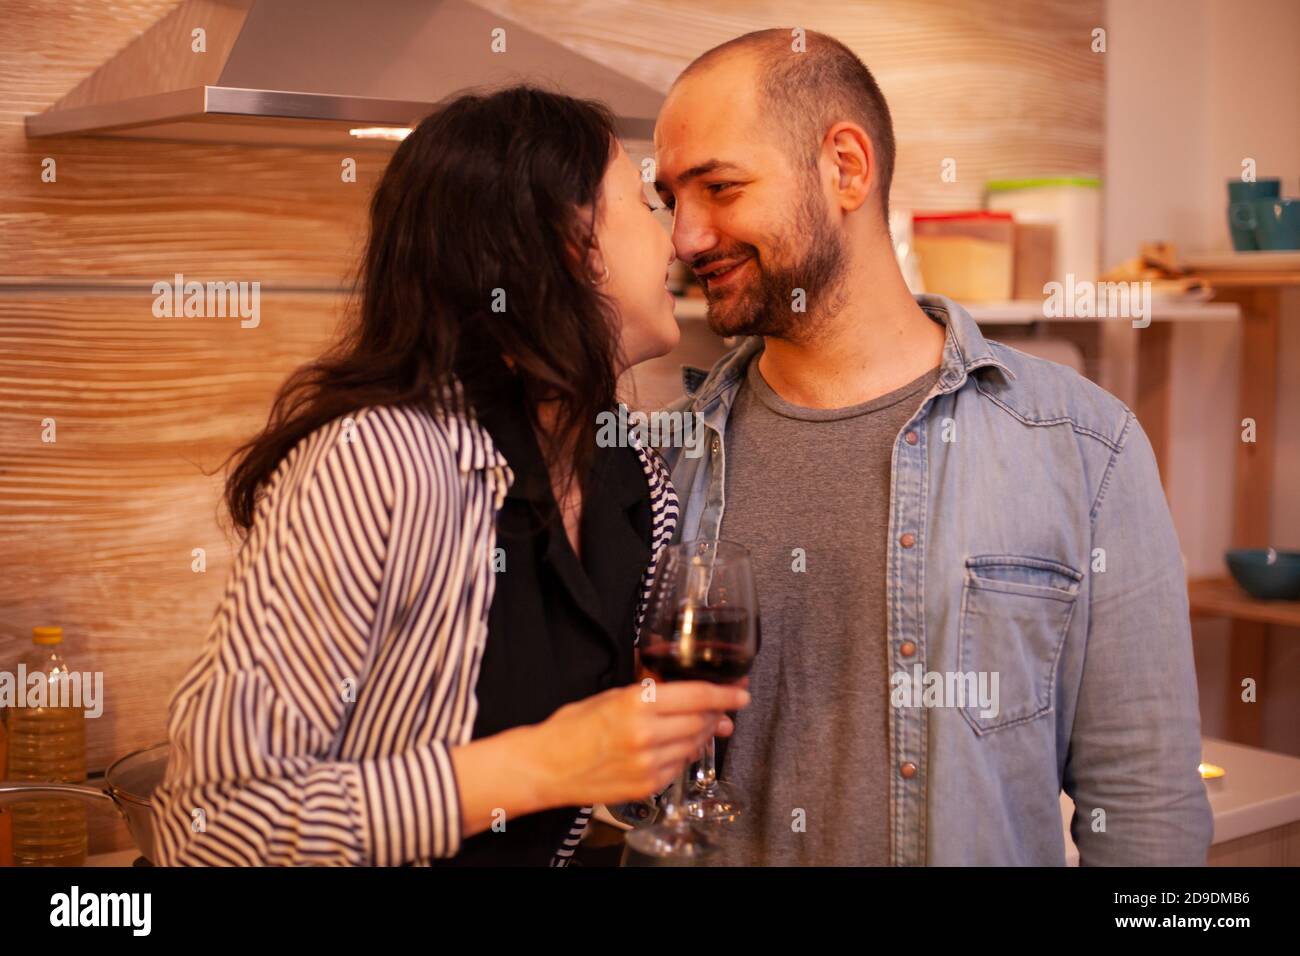 Couple touching noses and having romance date in kitchen. Adult couple at home, drinking red wine, talking, smiling, enjoying the meal in dining room. Stock Photo